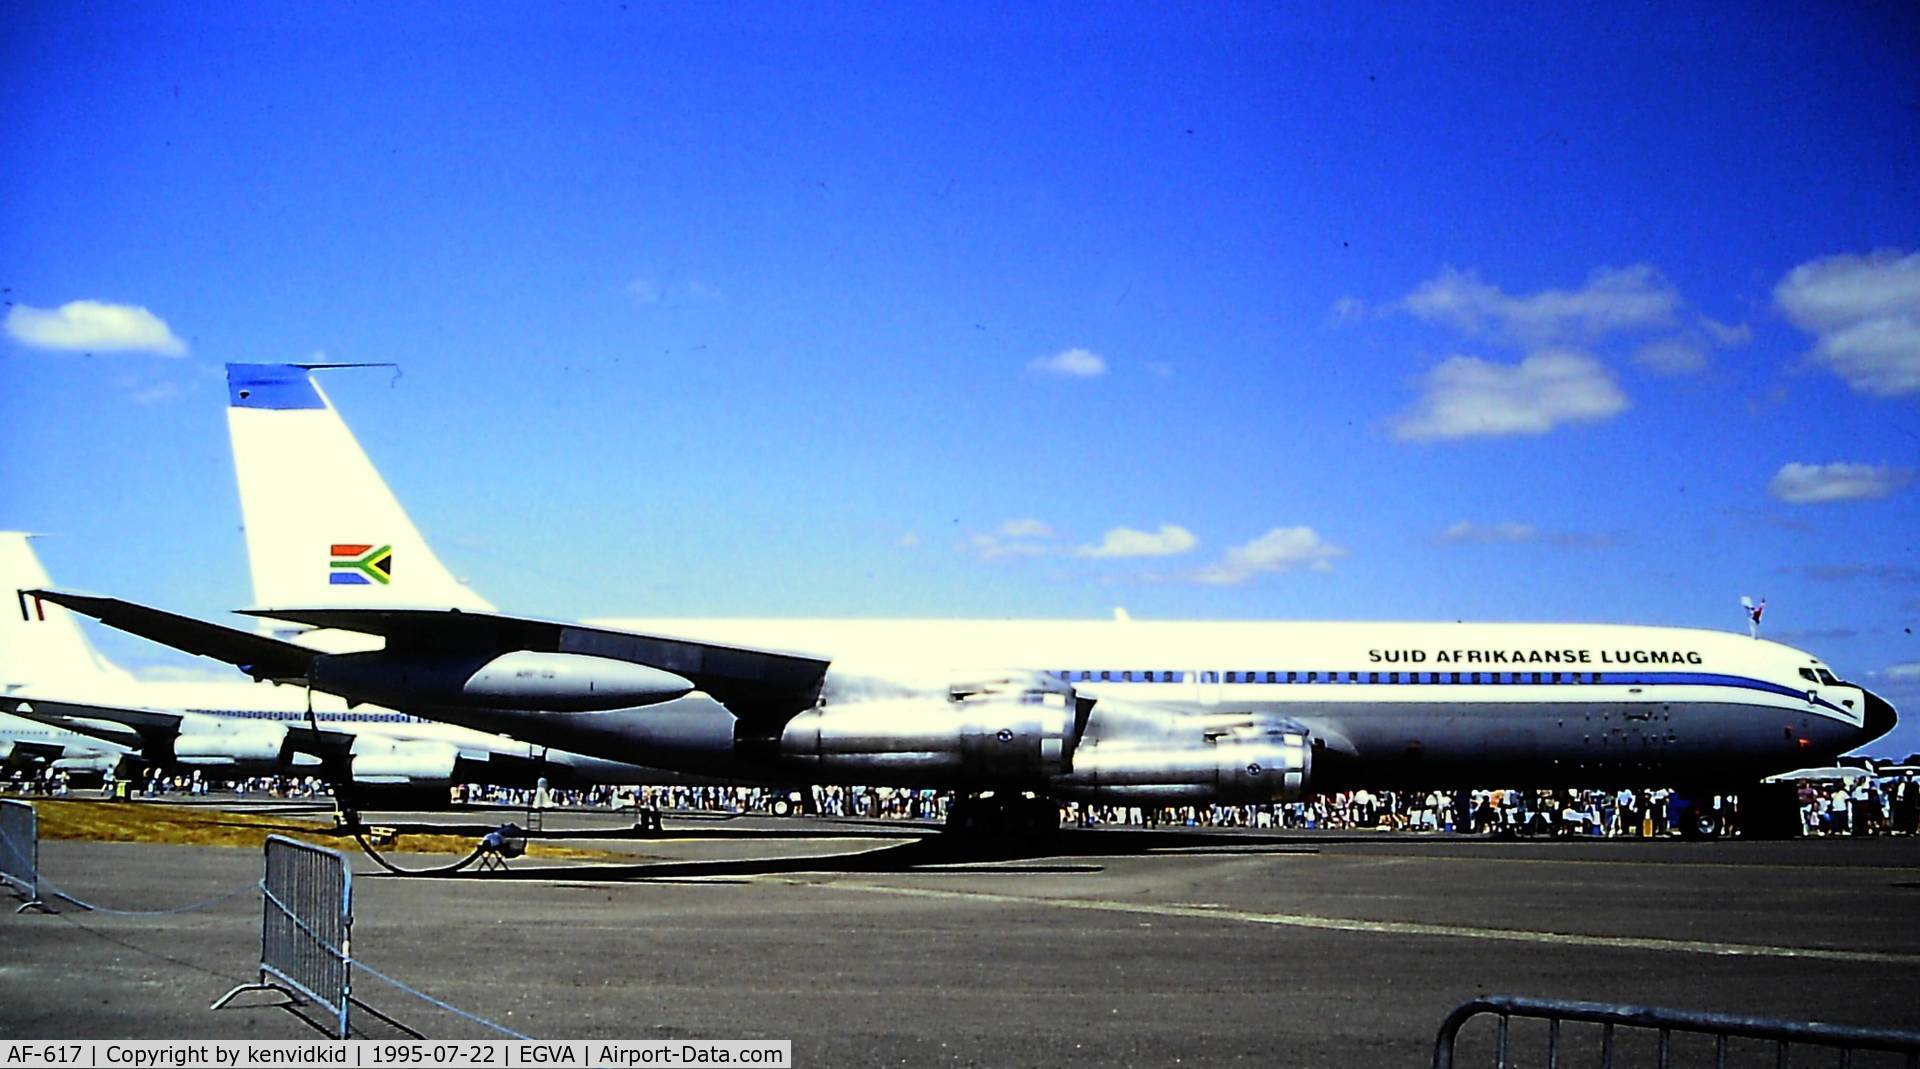 AF-617, 1967 Boeing 707-328C C/N 19723, At the 1995 Fairford International Air Tattoo, scanned from slide.